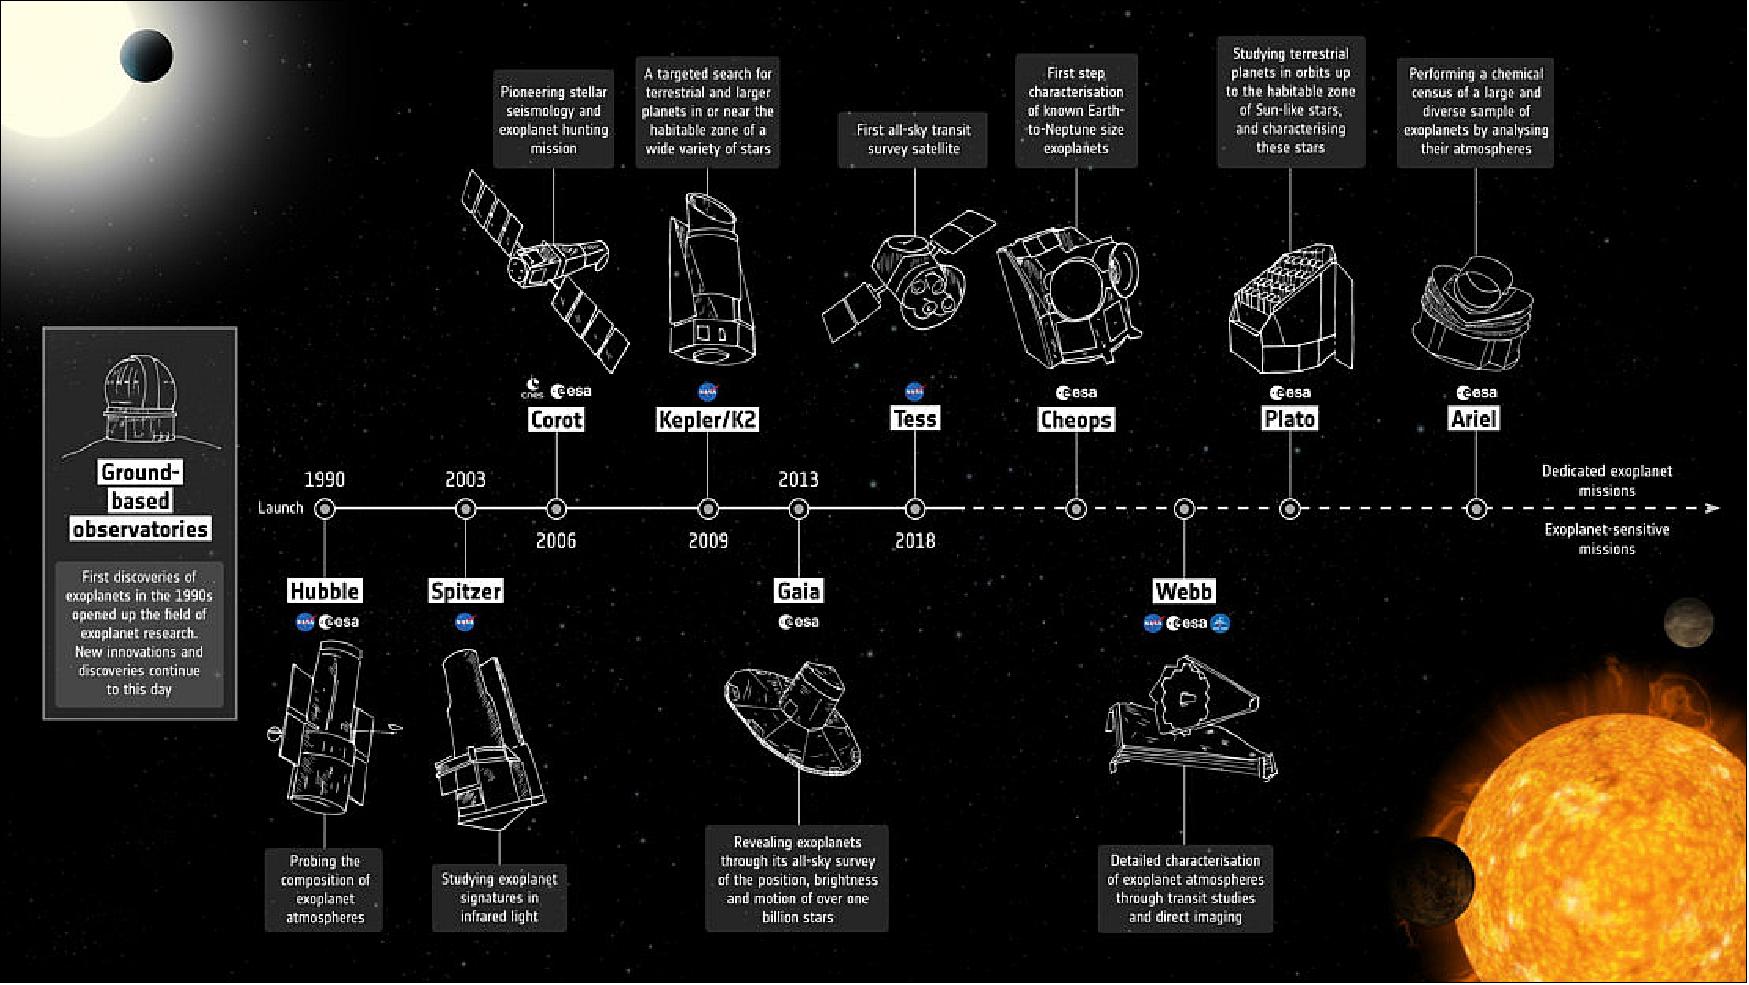 Figure 4: Overview of exoplanet mission timeline as well as contributing missions (image credit: ESA)